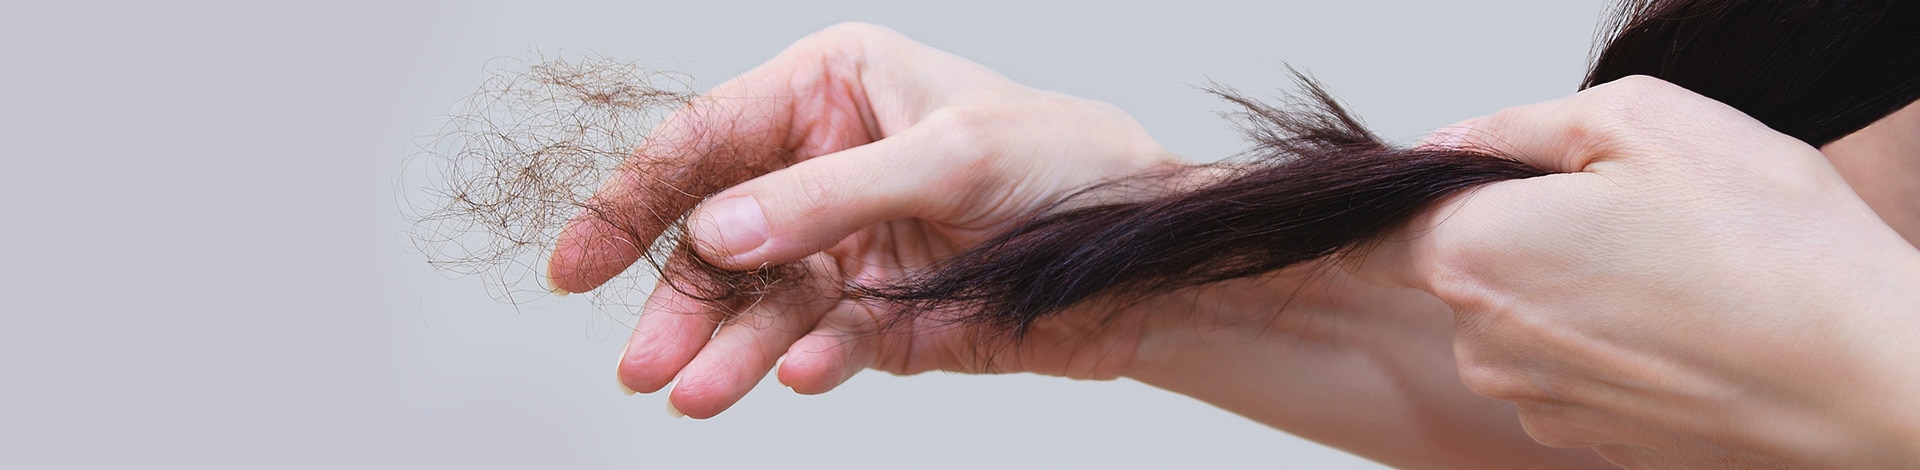 Women looking at hair clump in hand